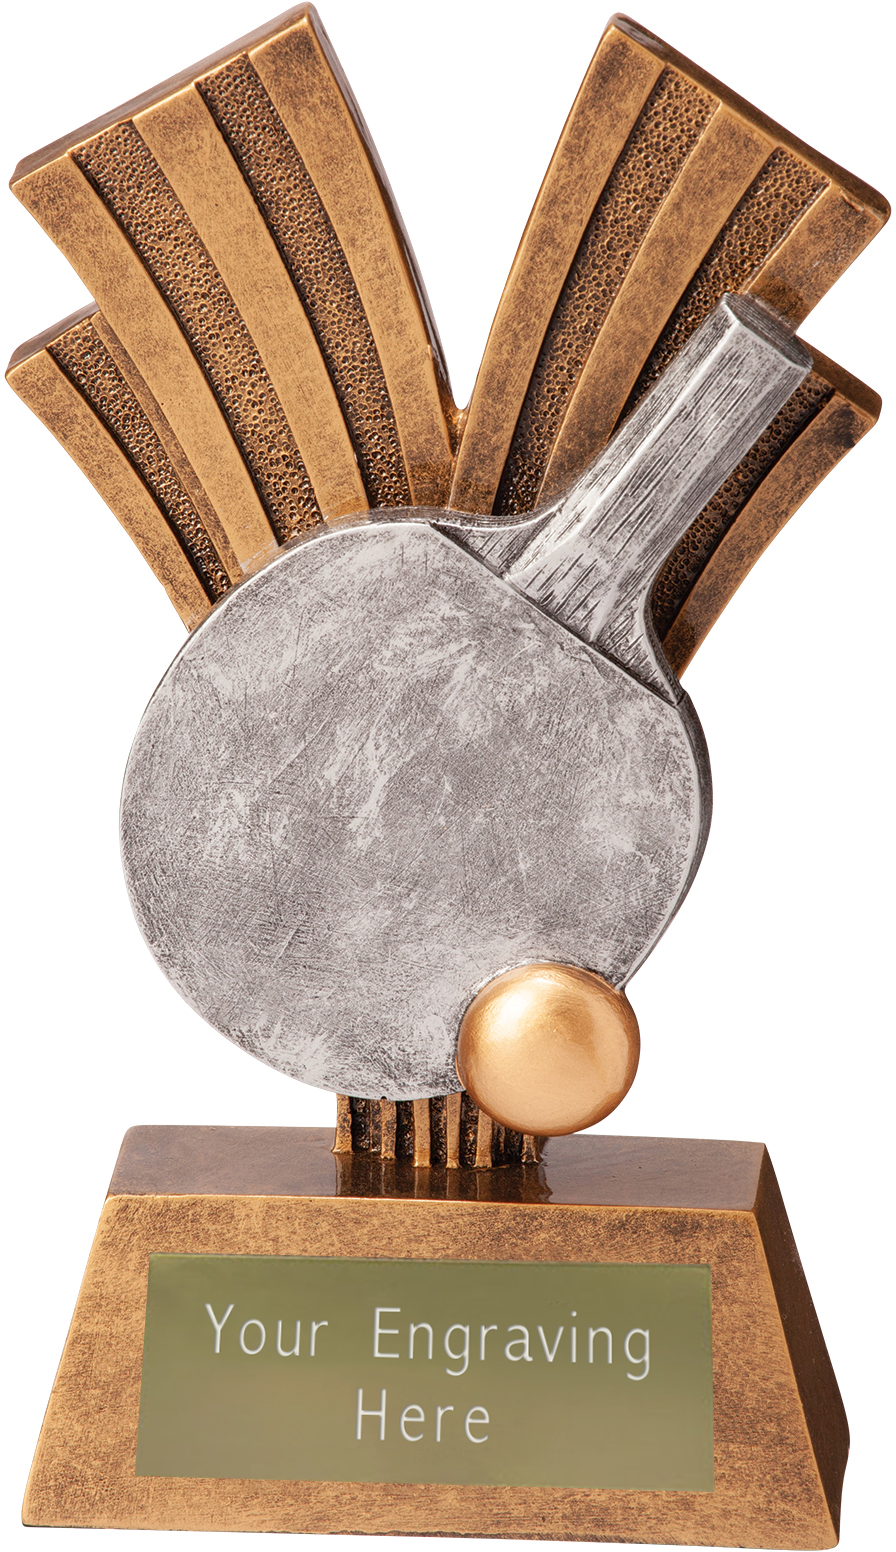 TABLE TENNIS RESIN TROPHIES SILVER/GOLD 5 SIZES FREE ENGRAVING & CENTRES 